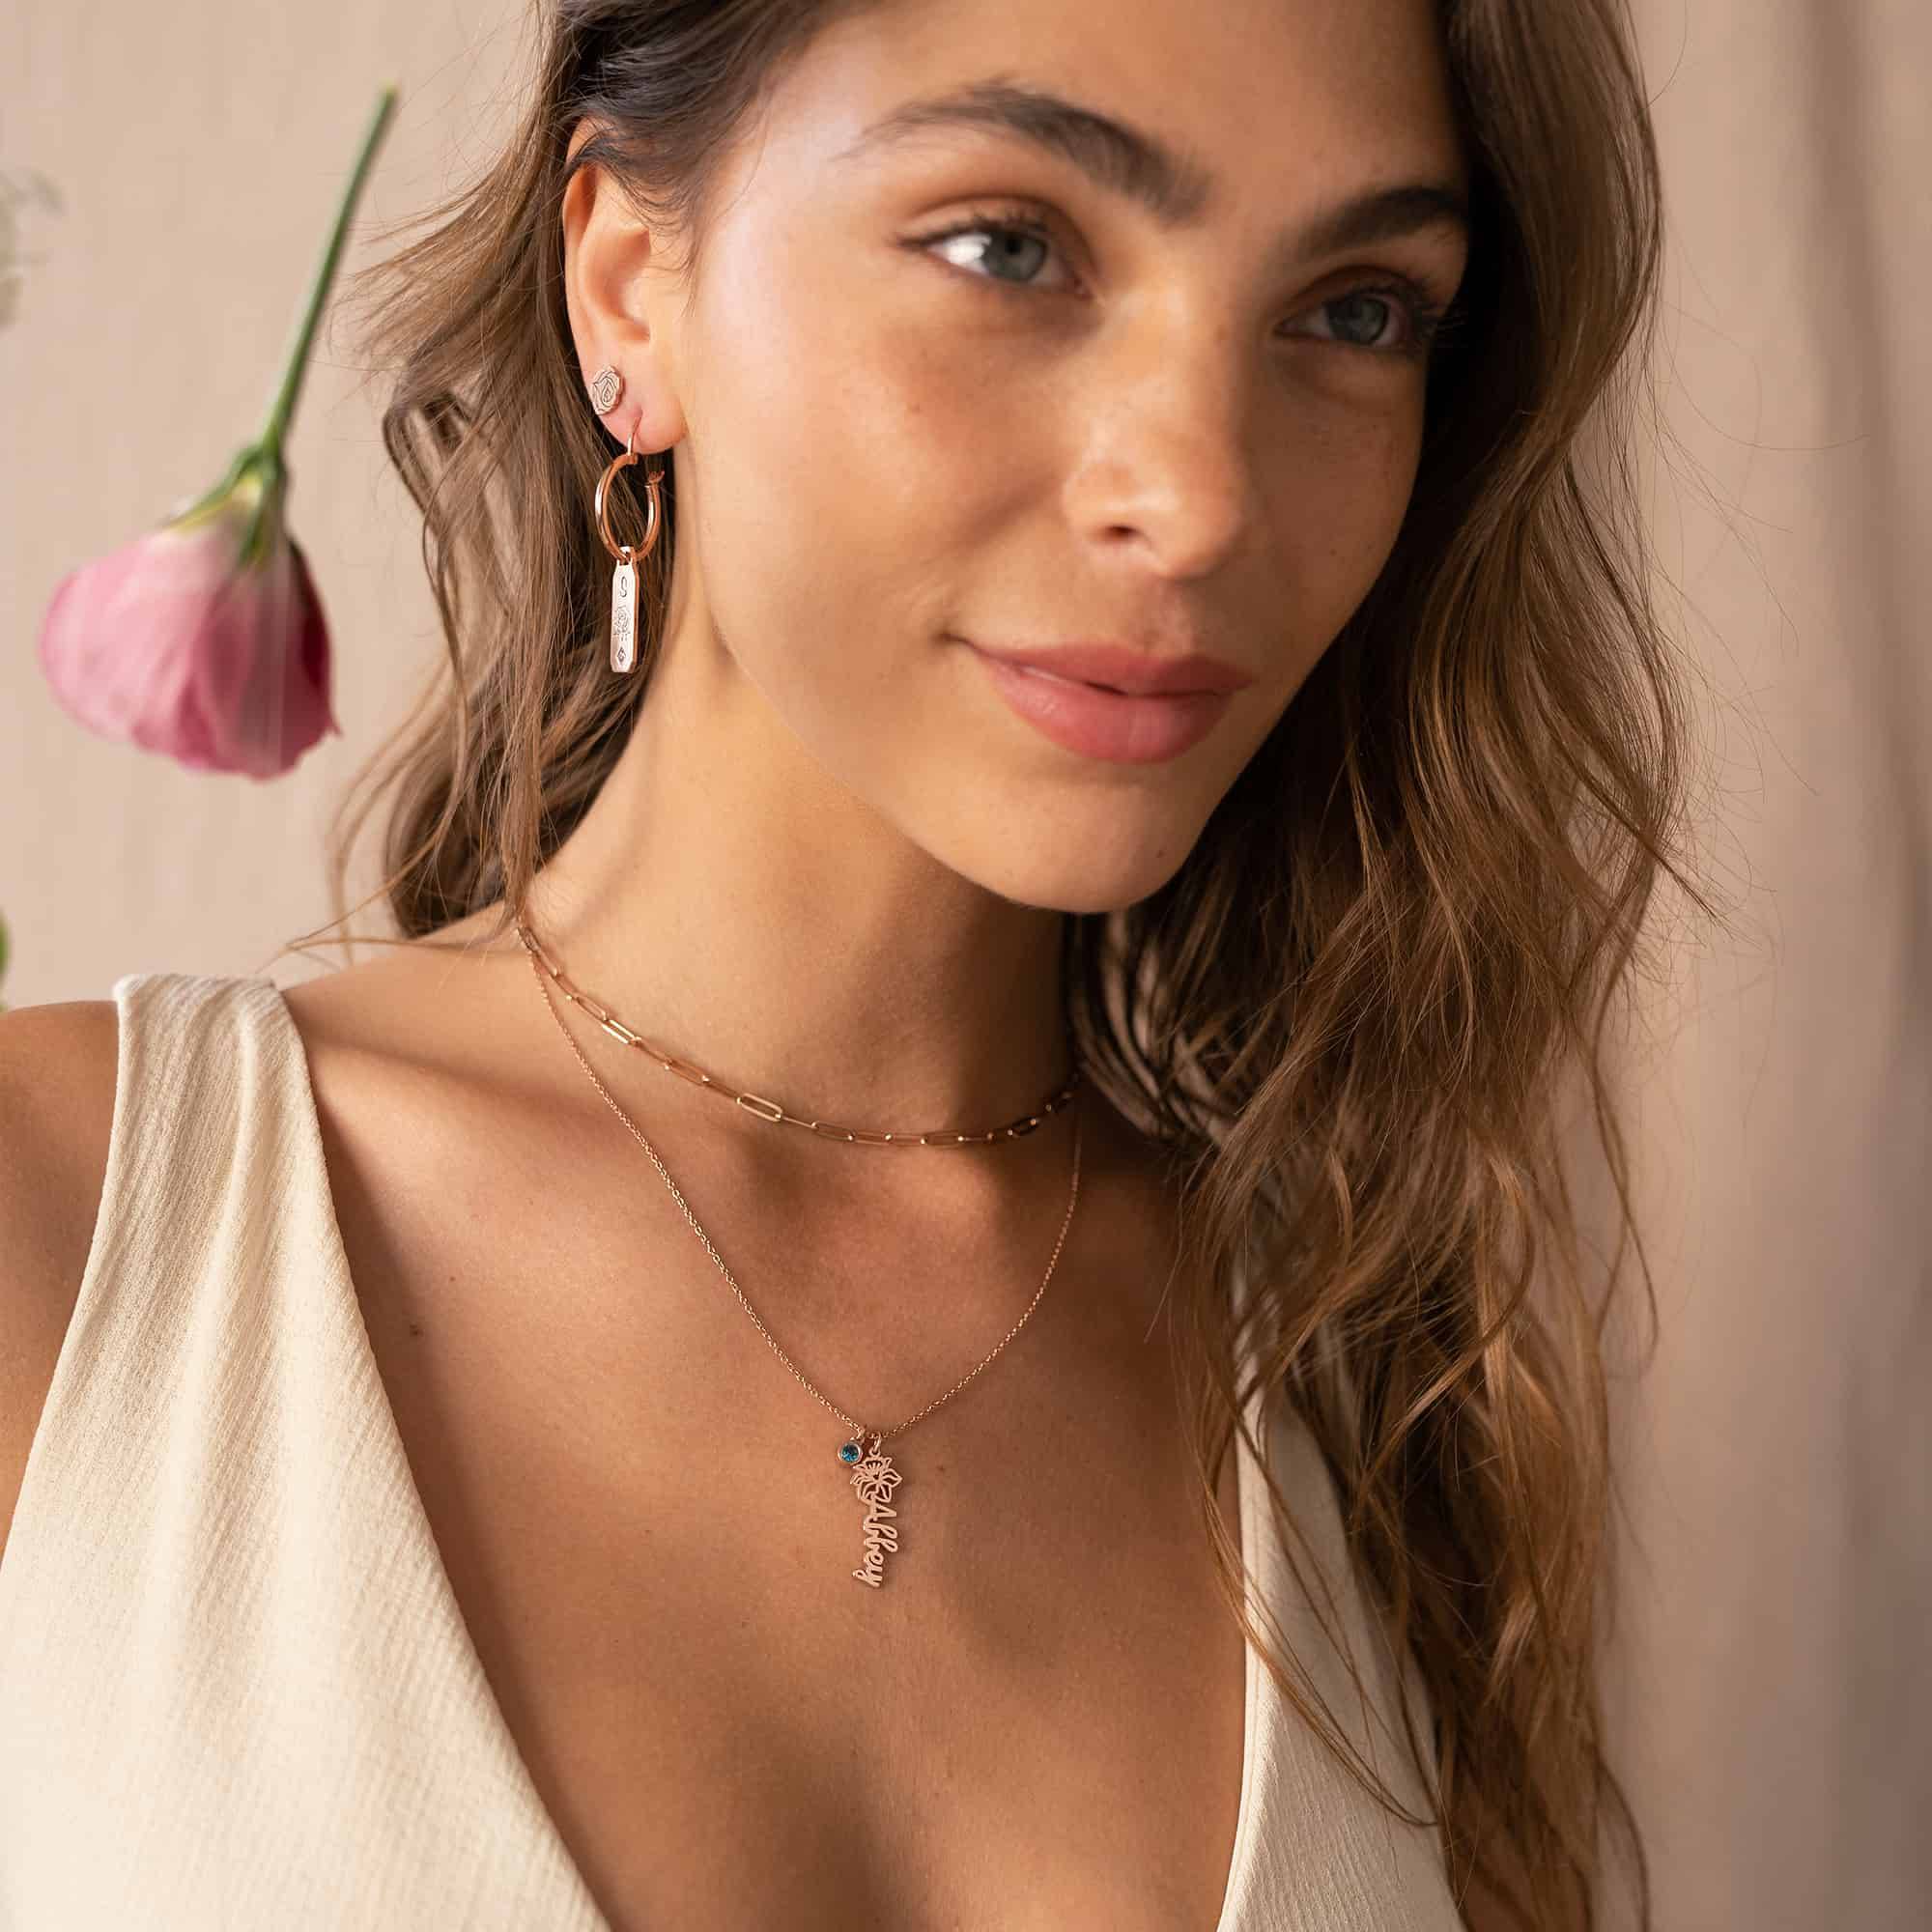 Blooming Birth Flower Name Necklace with Birthstone in 18K Rose Gold Vermeil-5 product photo